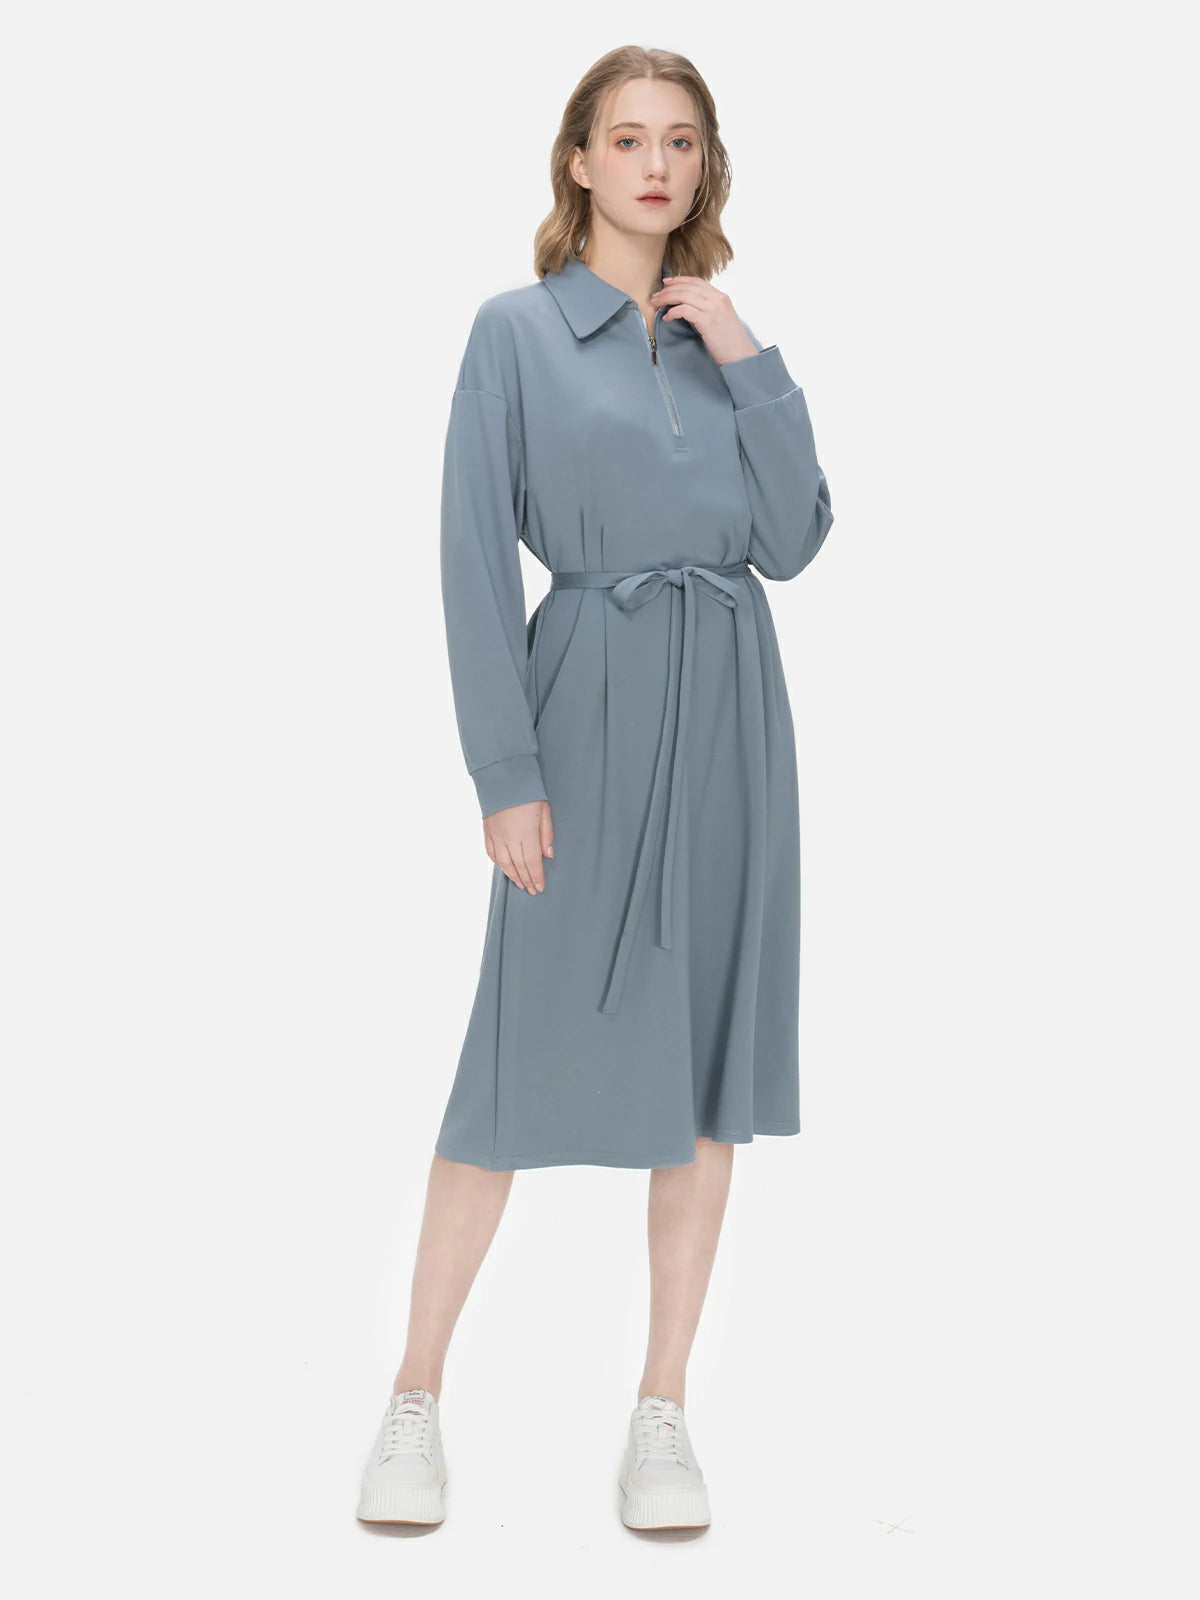 Versatile and fashionable midi dress with a blue-gray color palette, showcasing both classic and modern design elements.